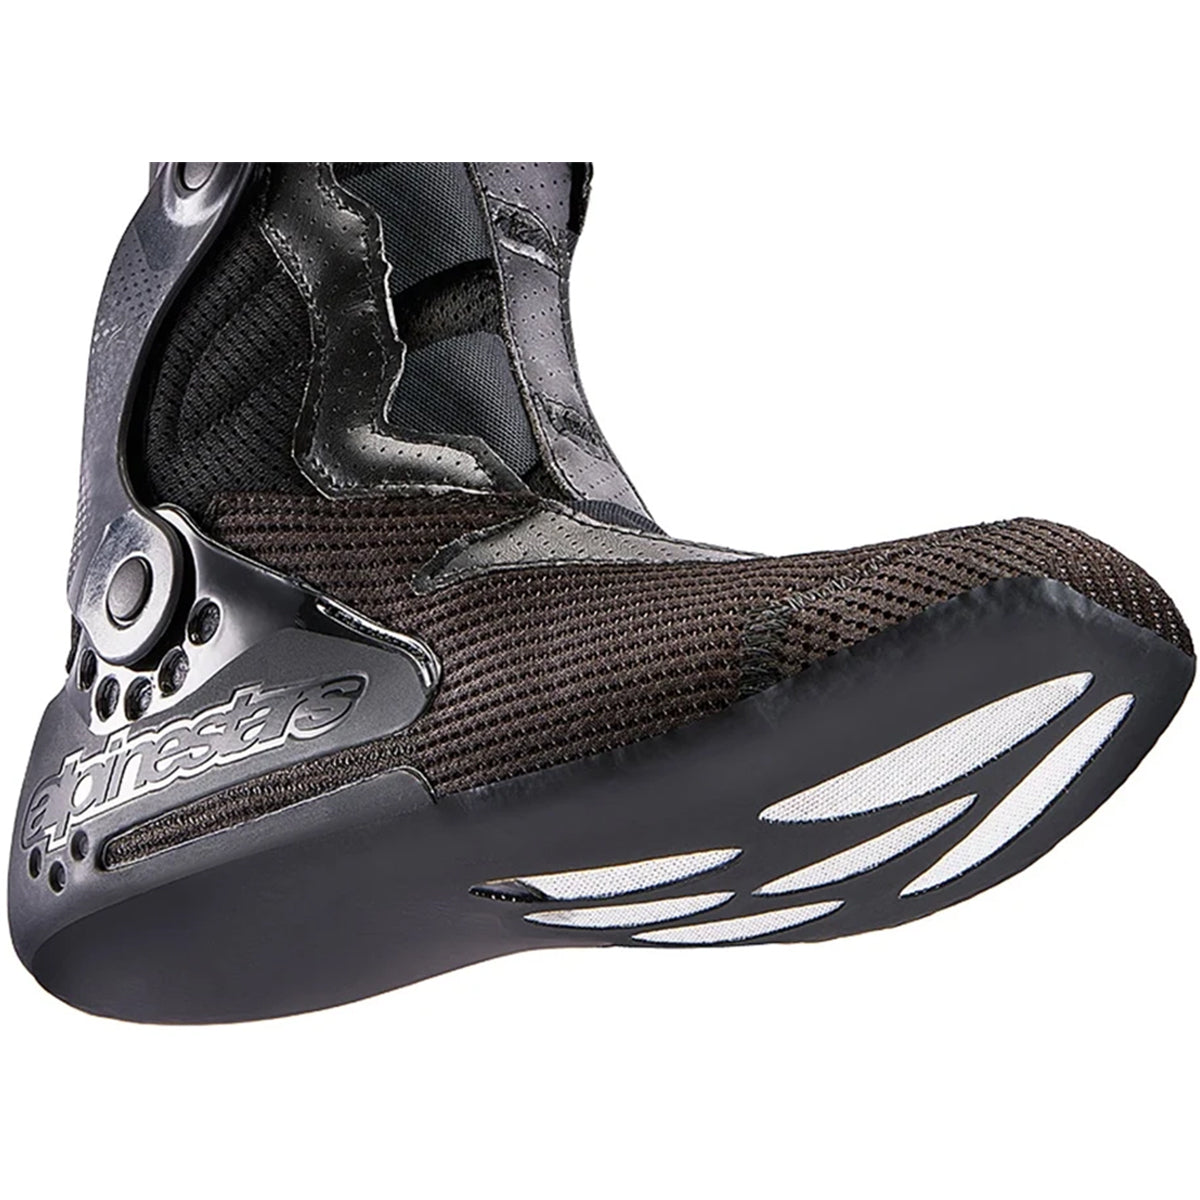 Alpinestars The New Tech 10 Supervented Off-Road Boots